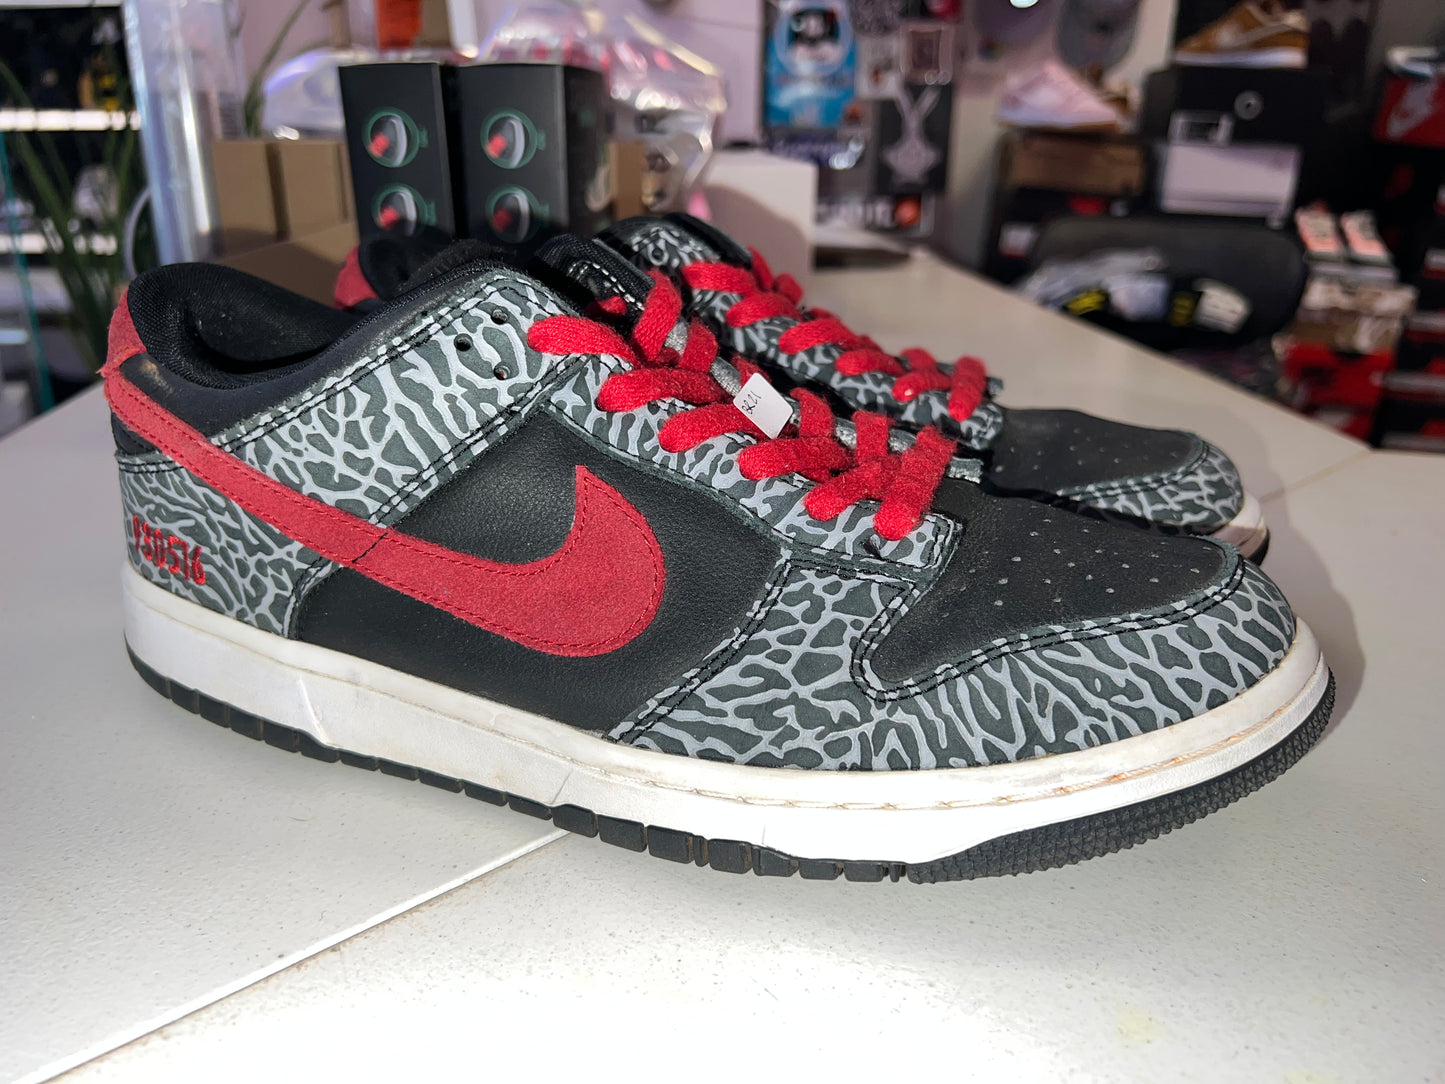 2013 Dunk ID 1of1